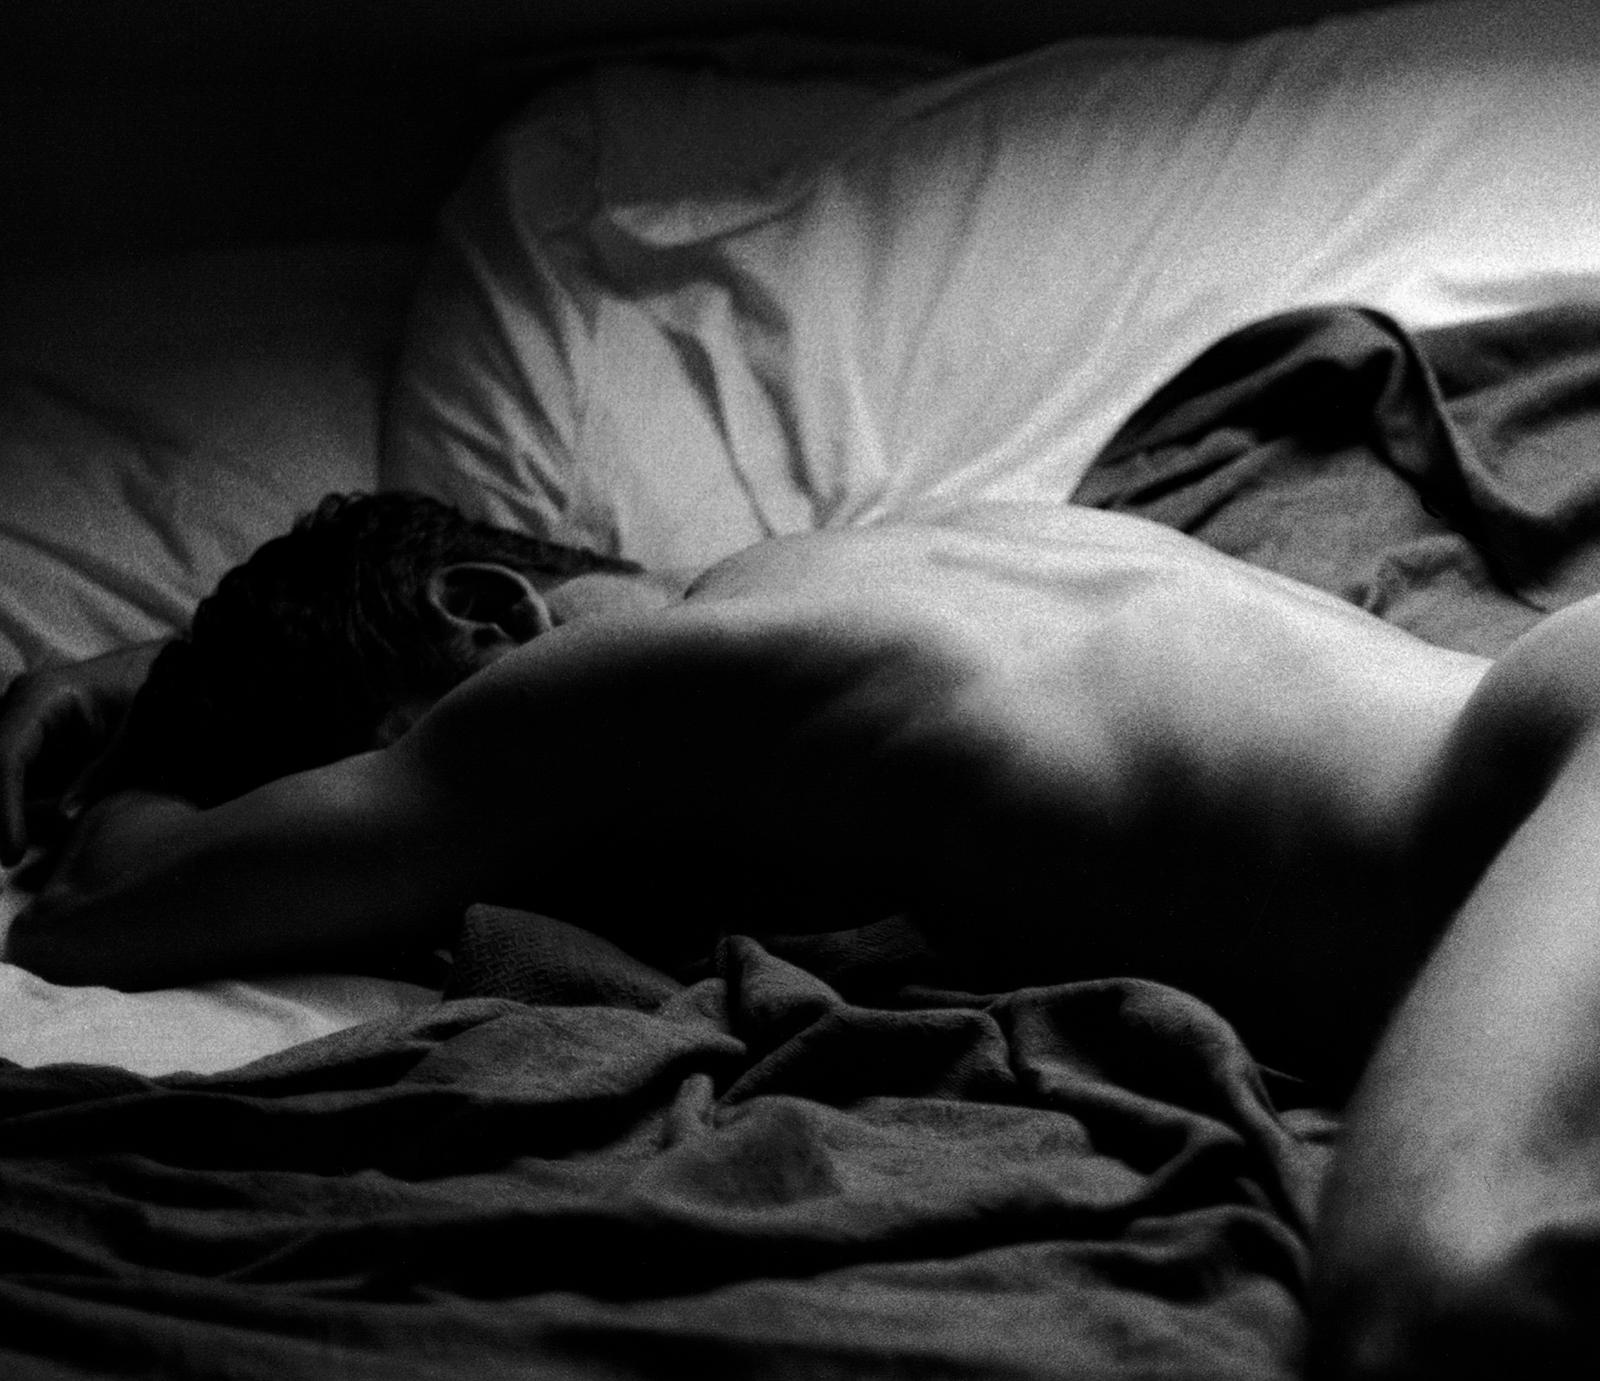 Signed limited edition nude print, Black white Contemporary, Man on bed - Craig - Photograph by Ian Sanderson